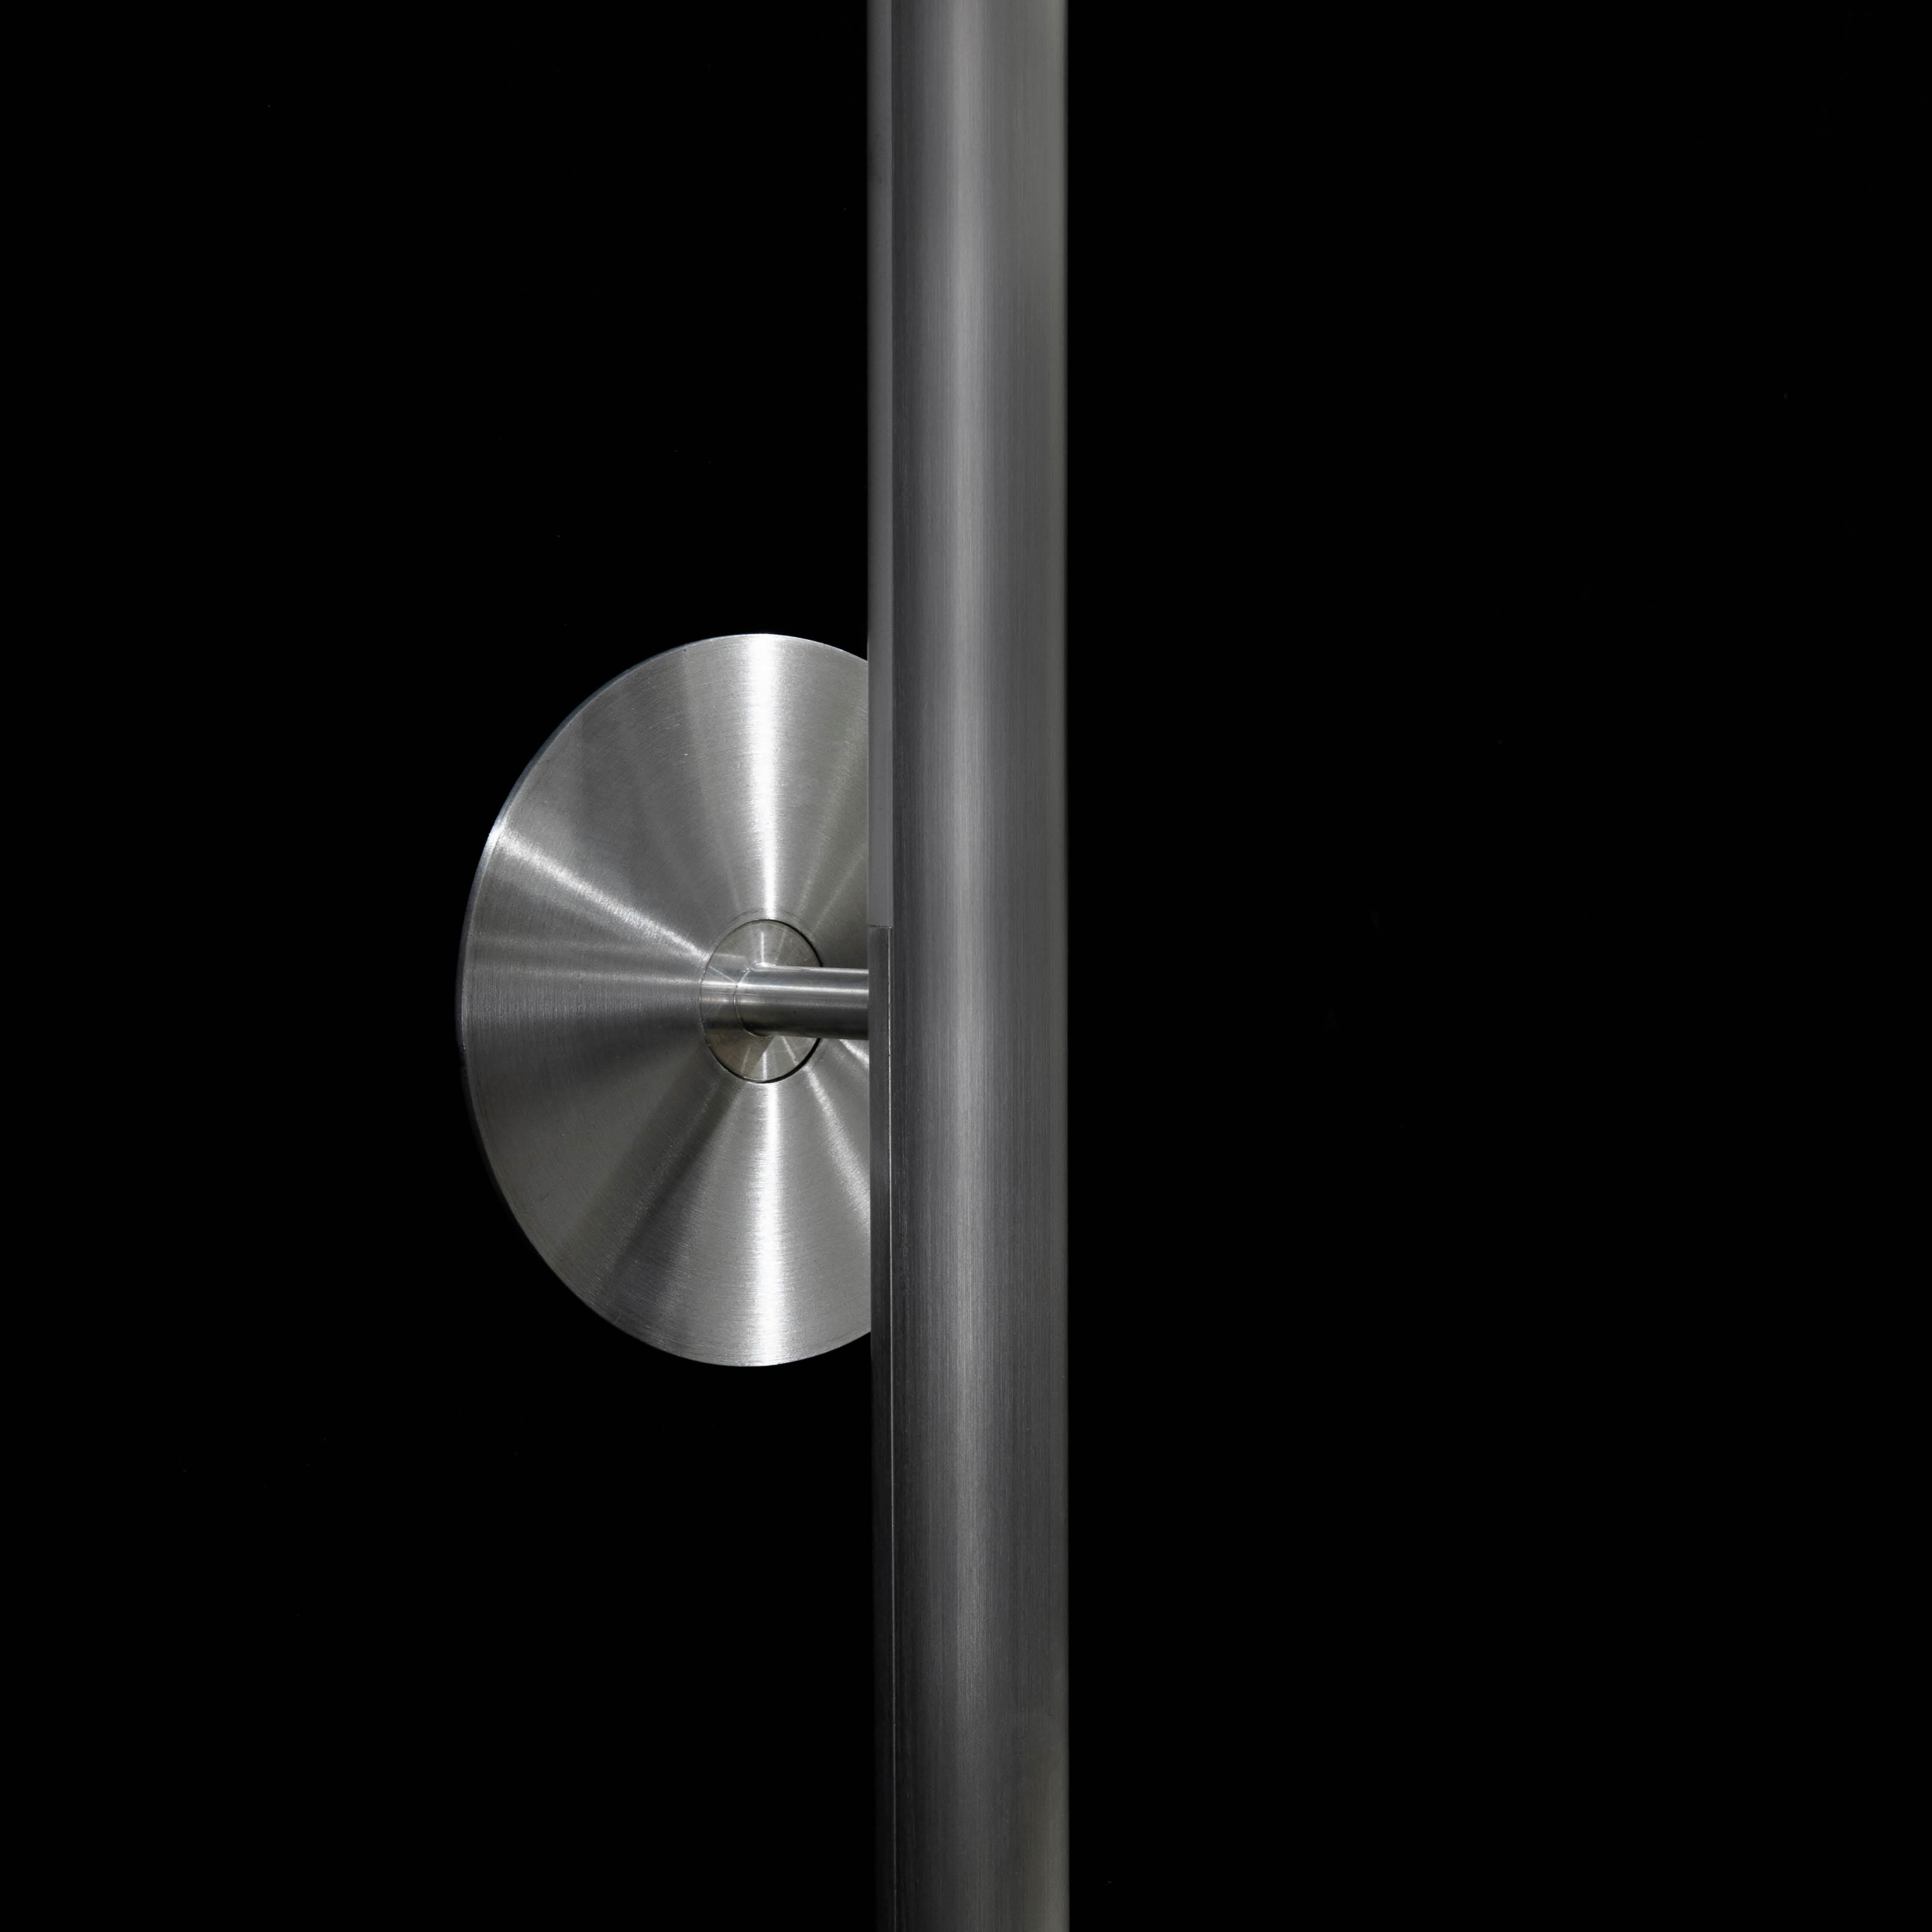 ‘Heavy Metal’ by B-TD. A new series of hand-brushed satin finishes highlighting the elemental beauty of raw metal. 

Formation wall sconce is a luxury wall-mounted LED light fixture ideally suited for hallways, powder rooms, and other domestic and